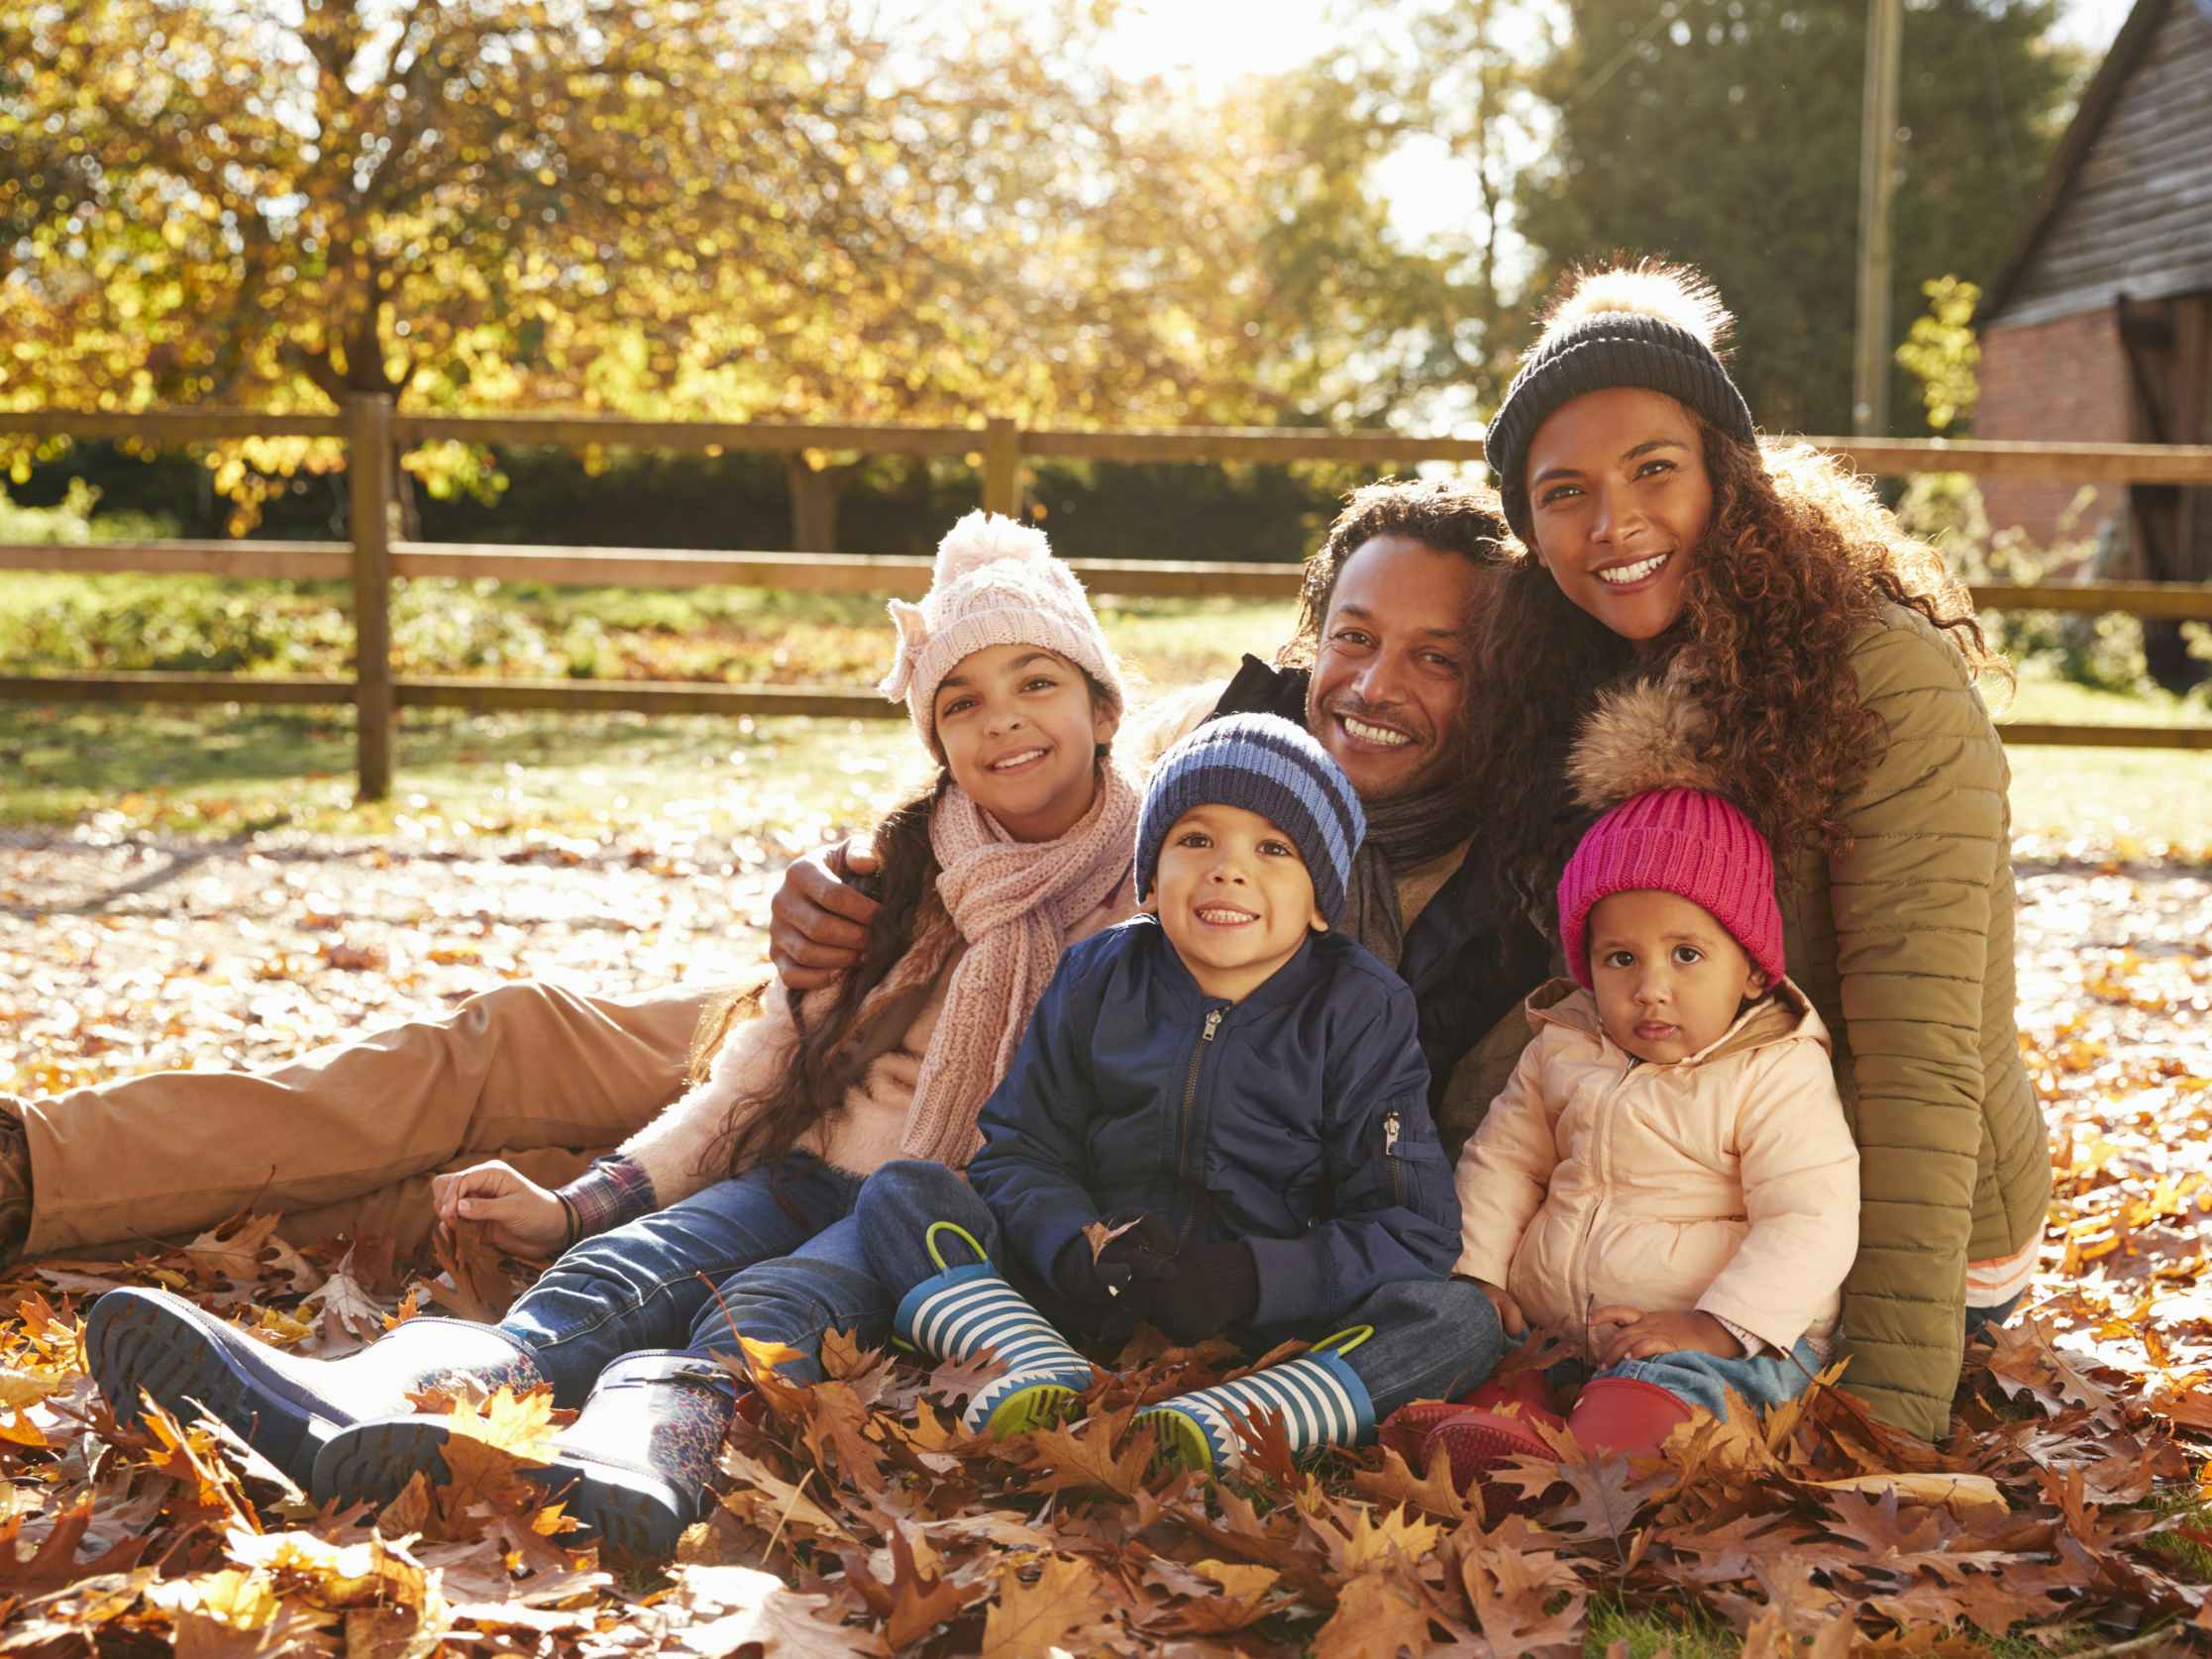 A family dressed for autumn posing together for a portrait in some leaves.